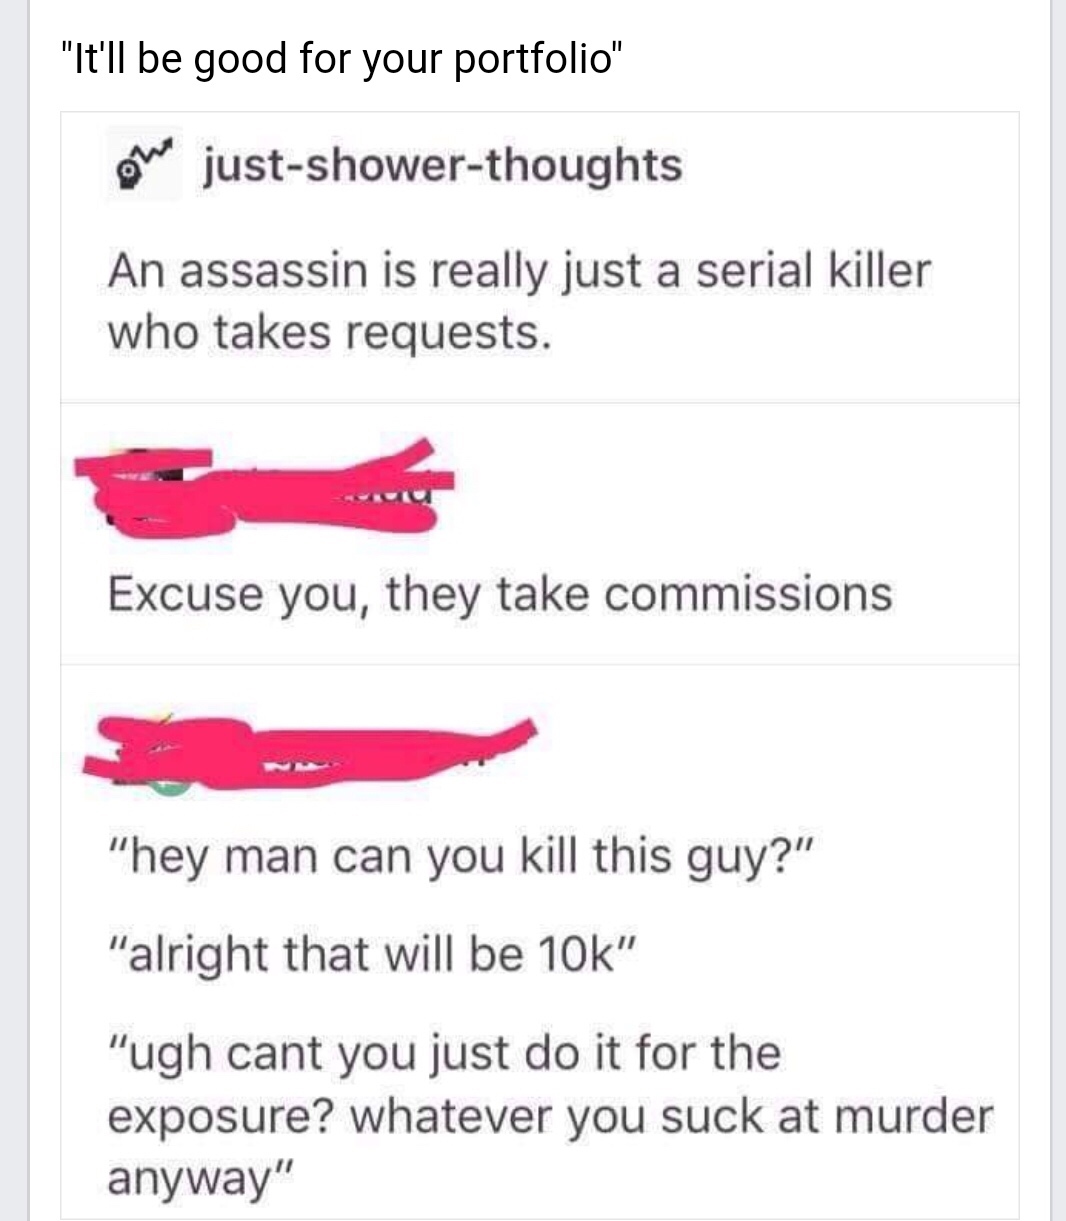 Just Shower thoughts com. Just Shower thoughts com на русском. CIA Assassination thoughts meme Page admin. Can t take перевод